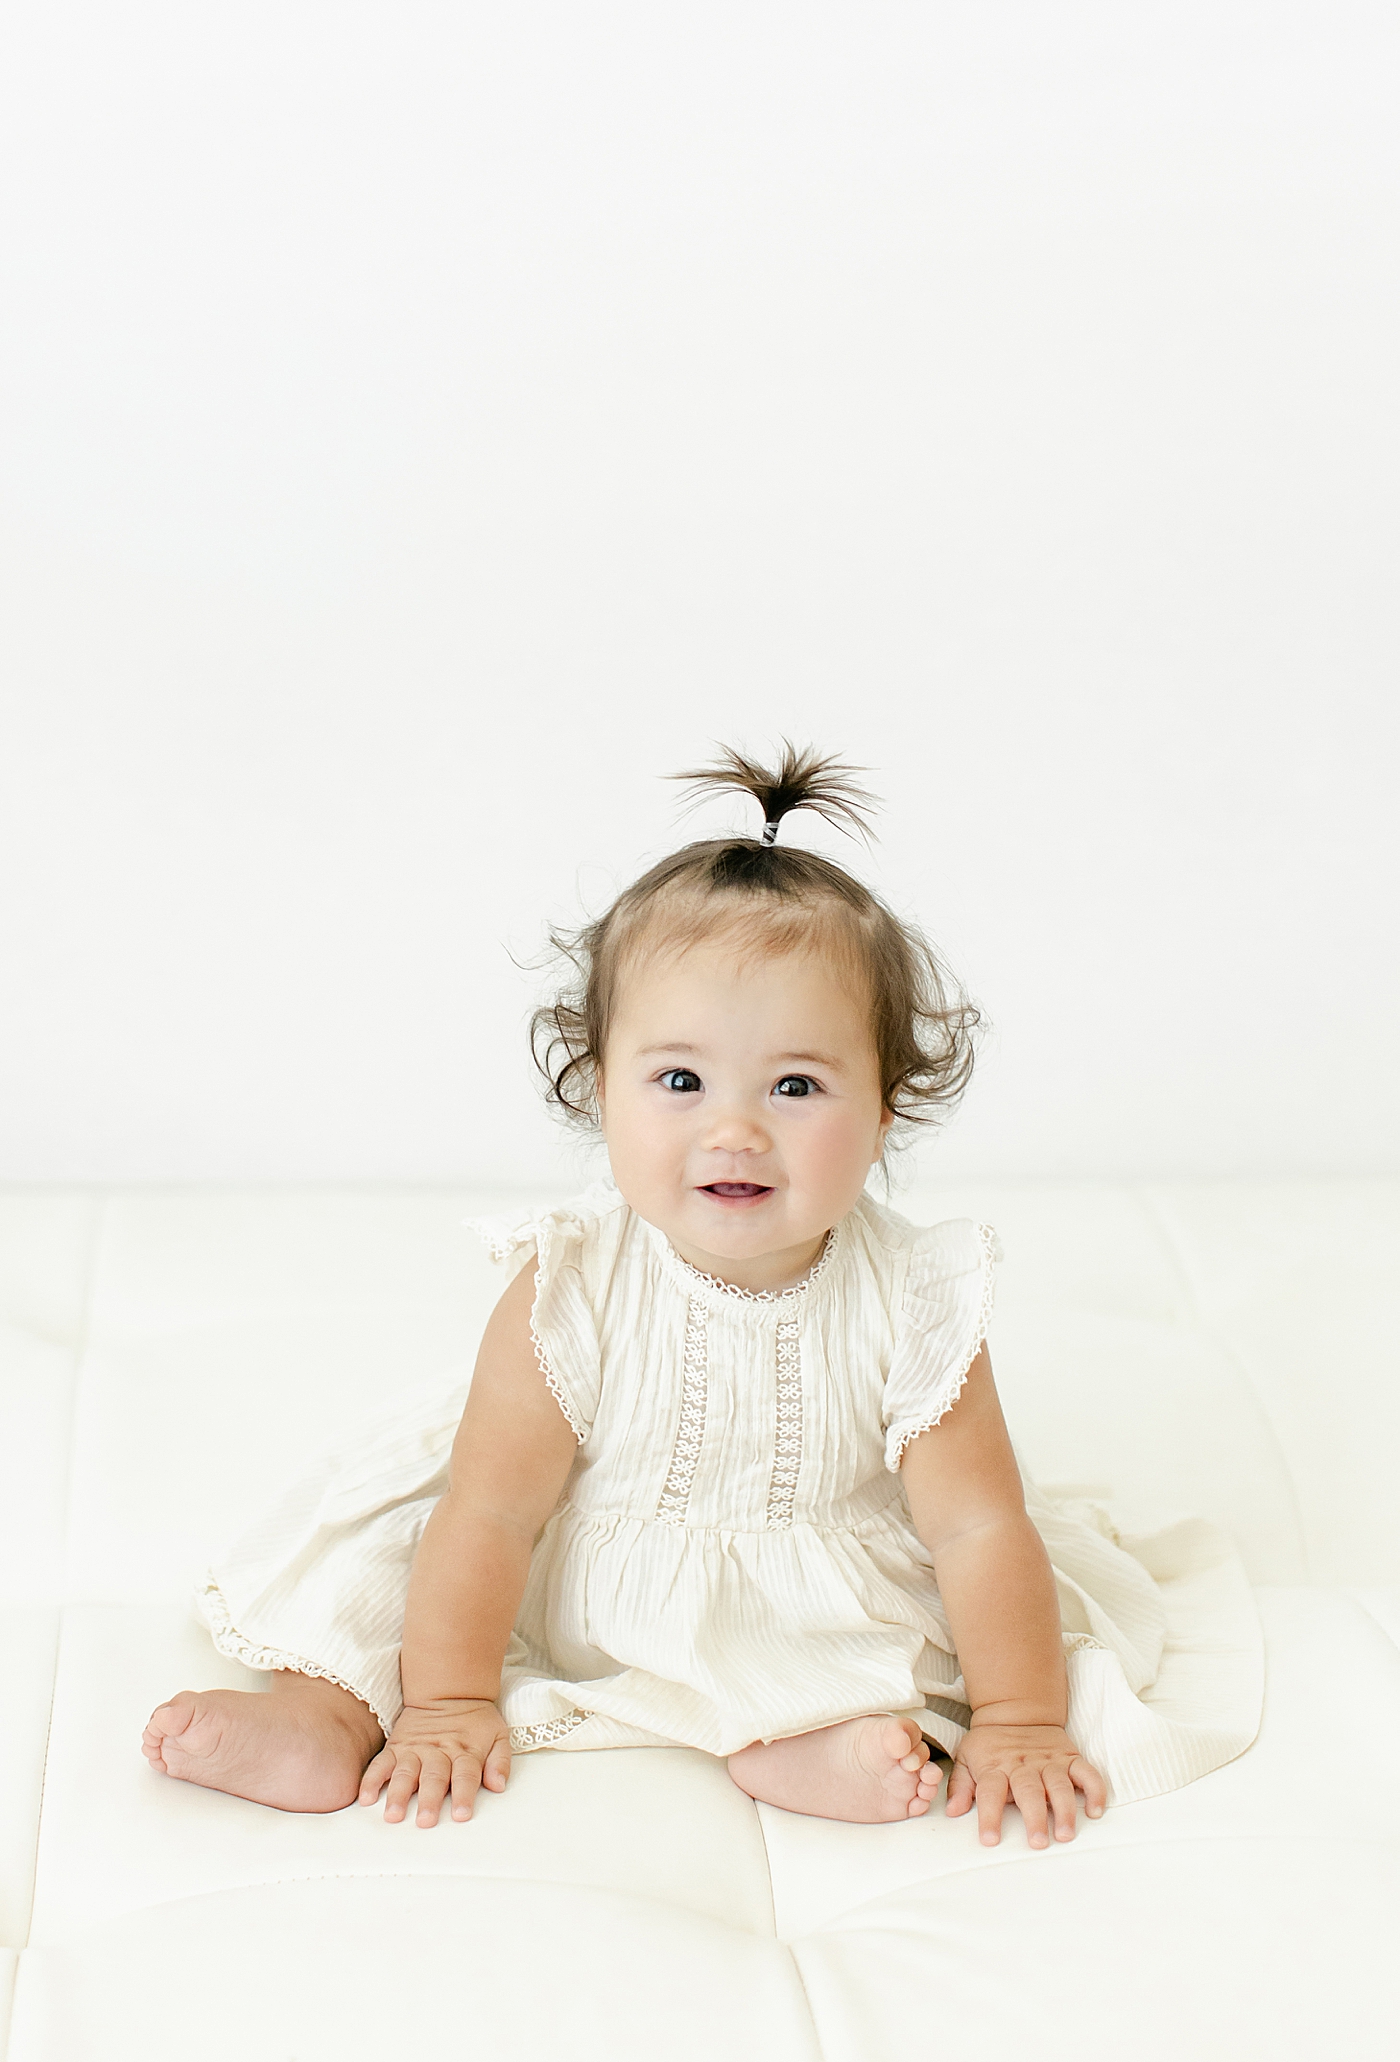 Baby girl in a white dress during her Six Month Studio Session | Image by Chrissy Winchester Photography